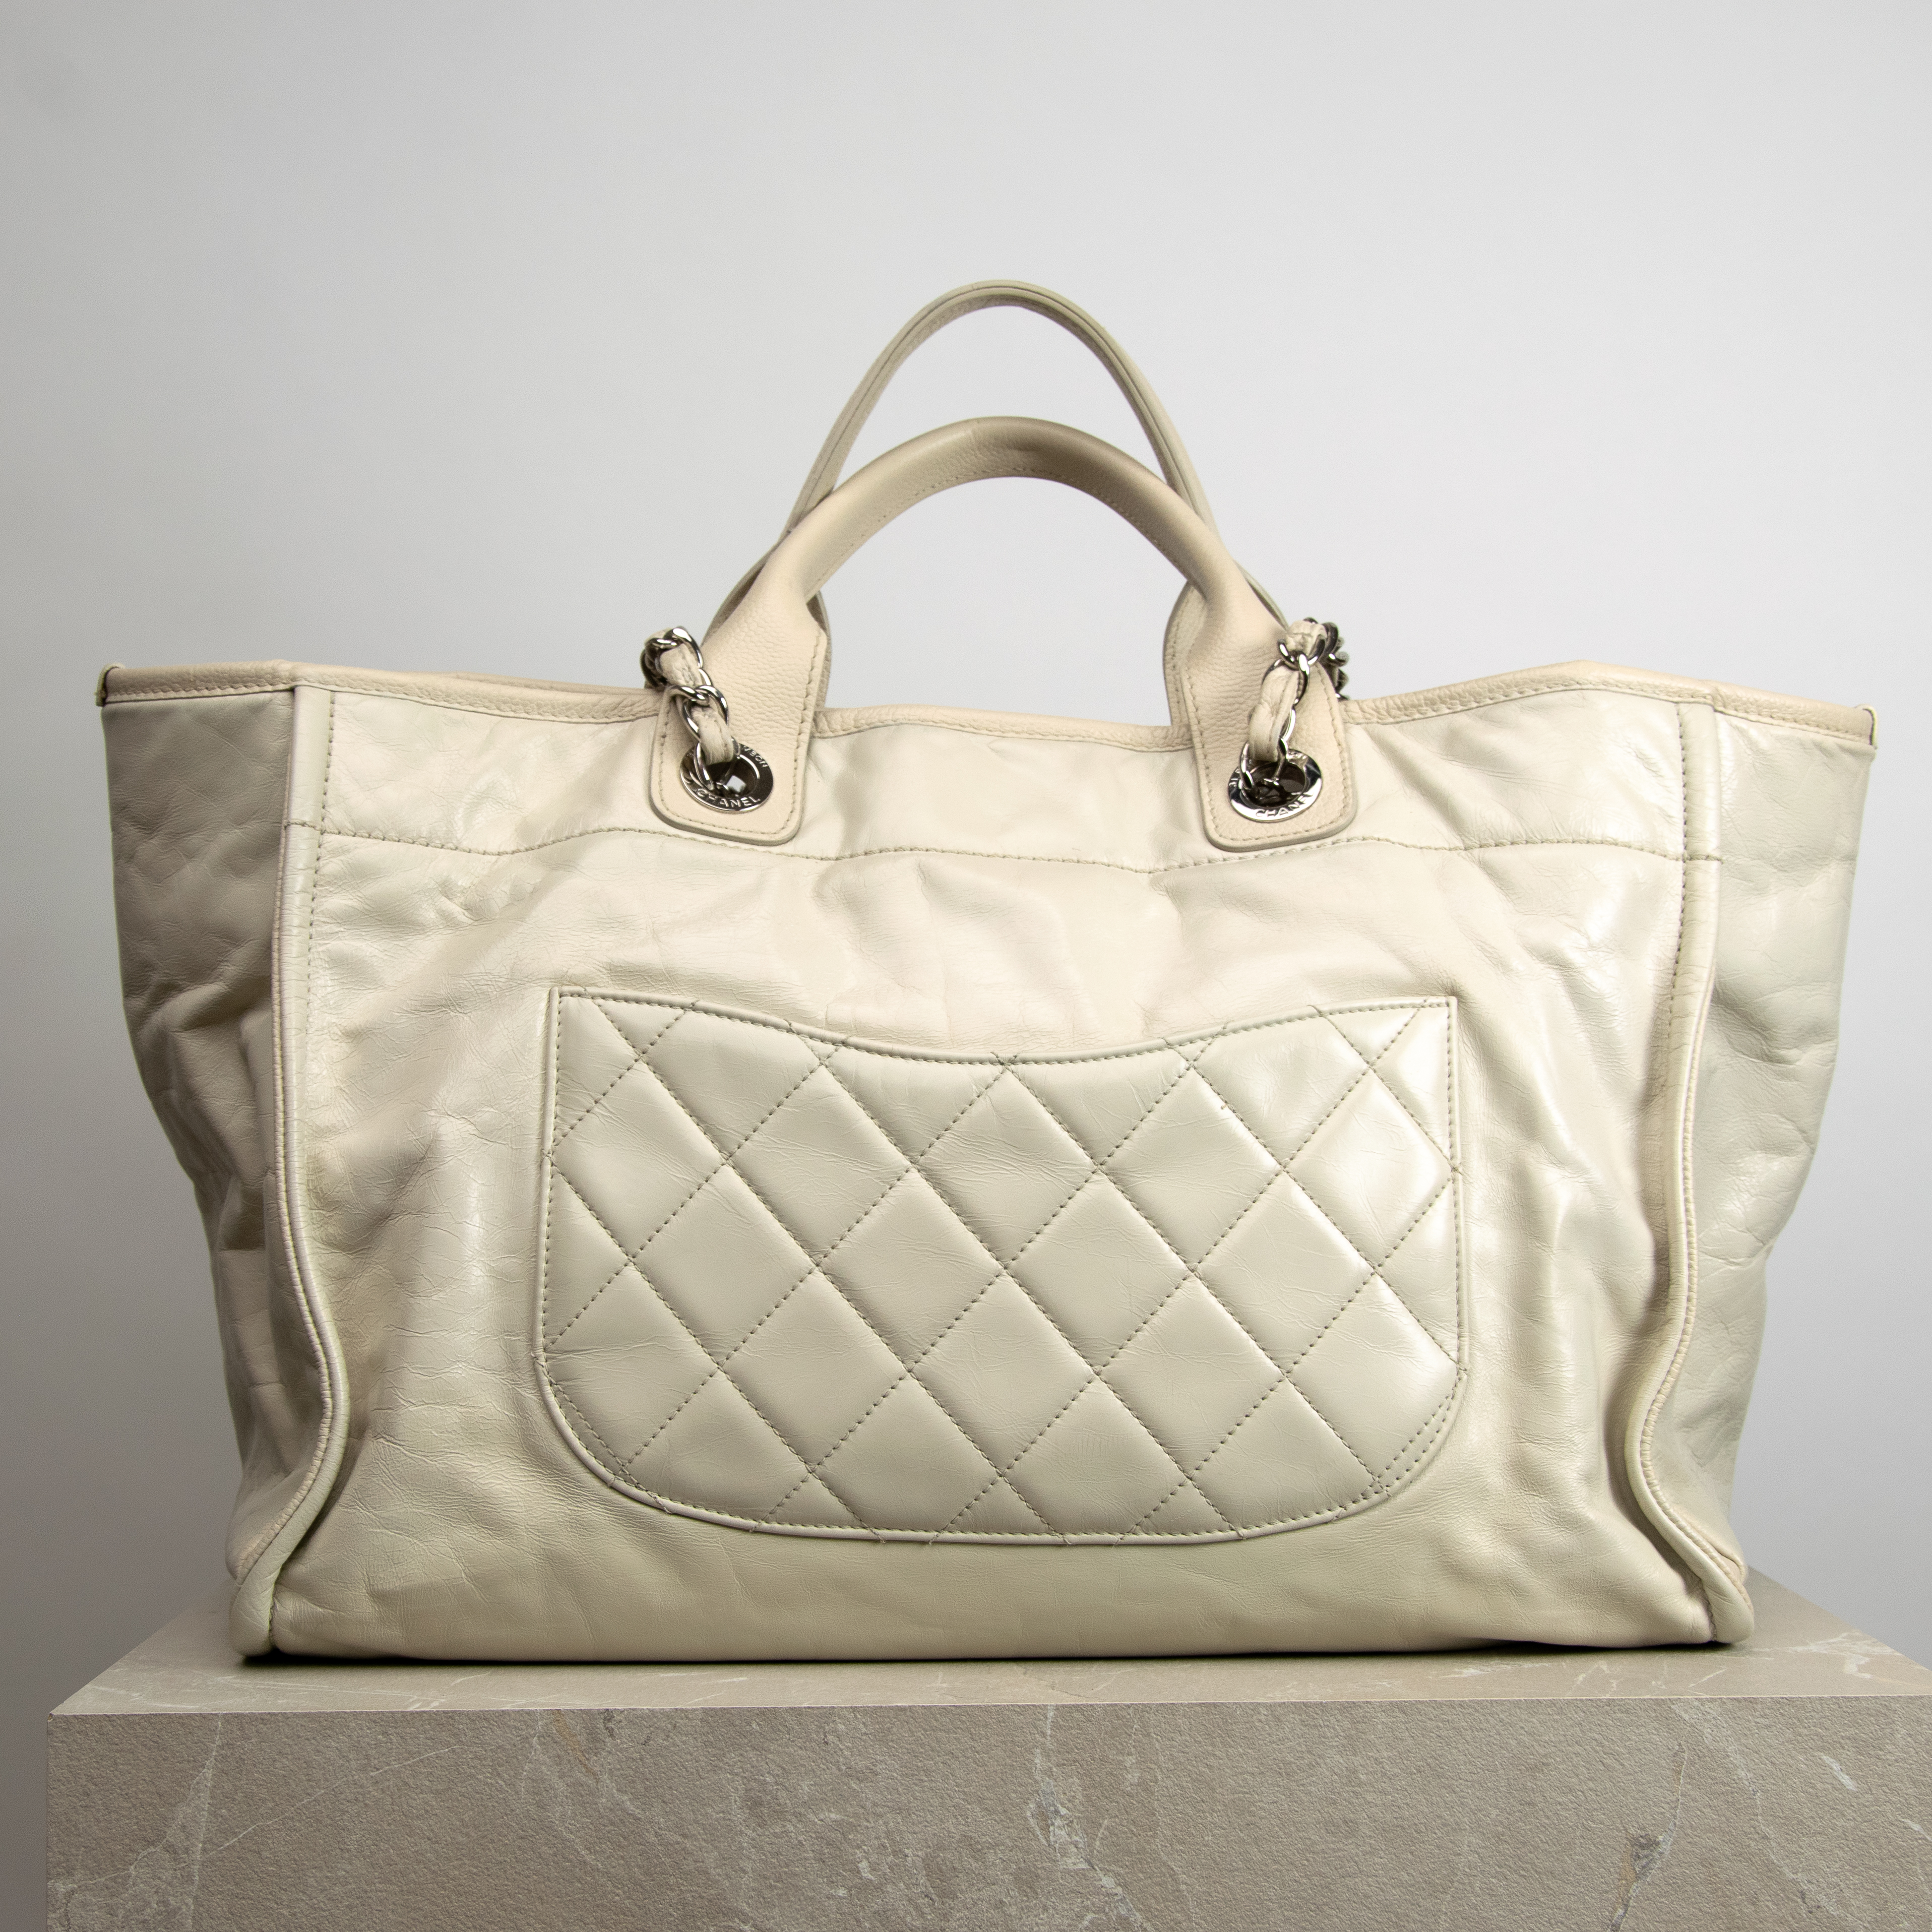 Chanel Deauville Ivory Shopping Tasche Tote Weiß Full Set